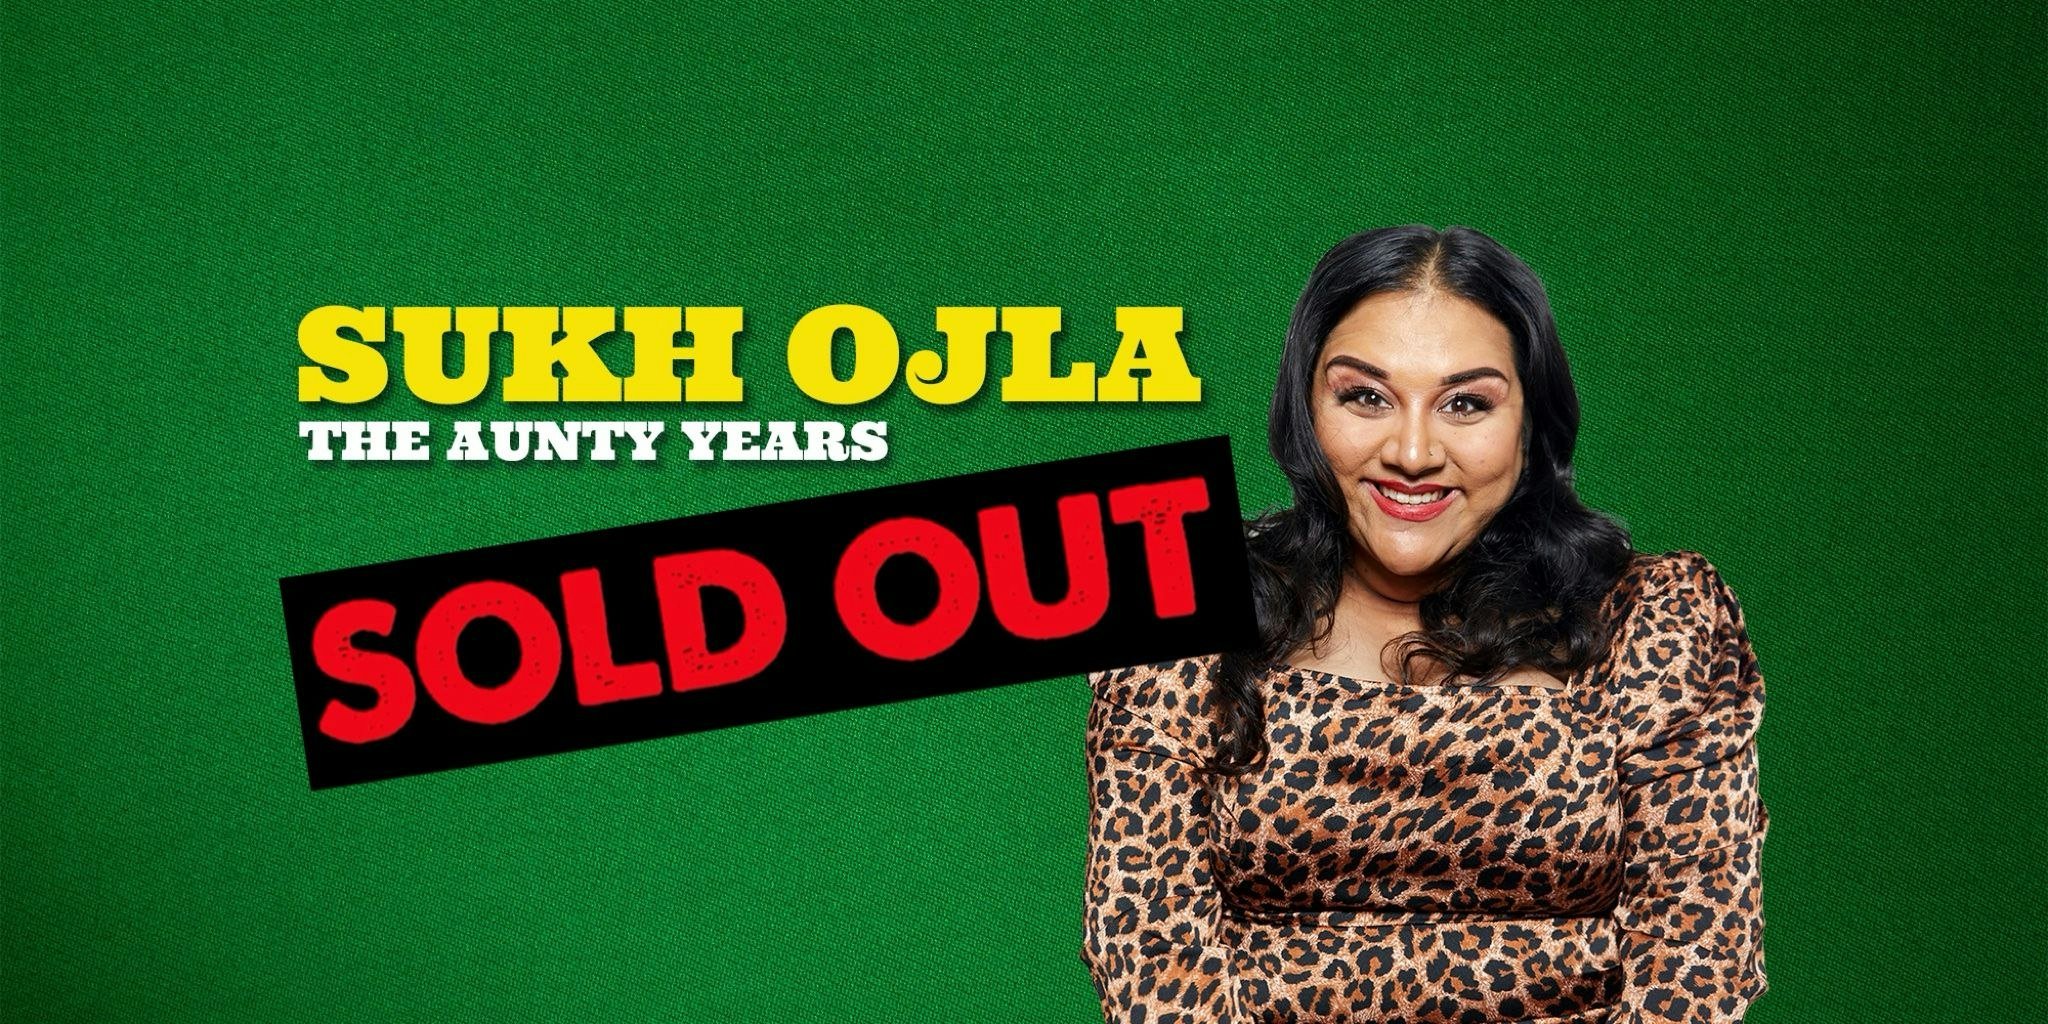 Sukh Ojla : The Aunty Years – Southampton ** SOLD OUT – Join Waiting List **